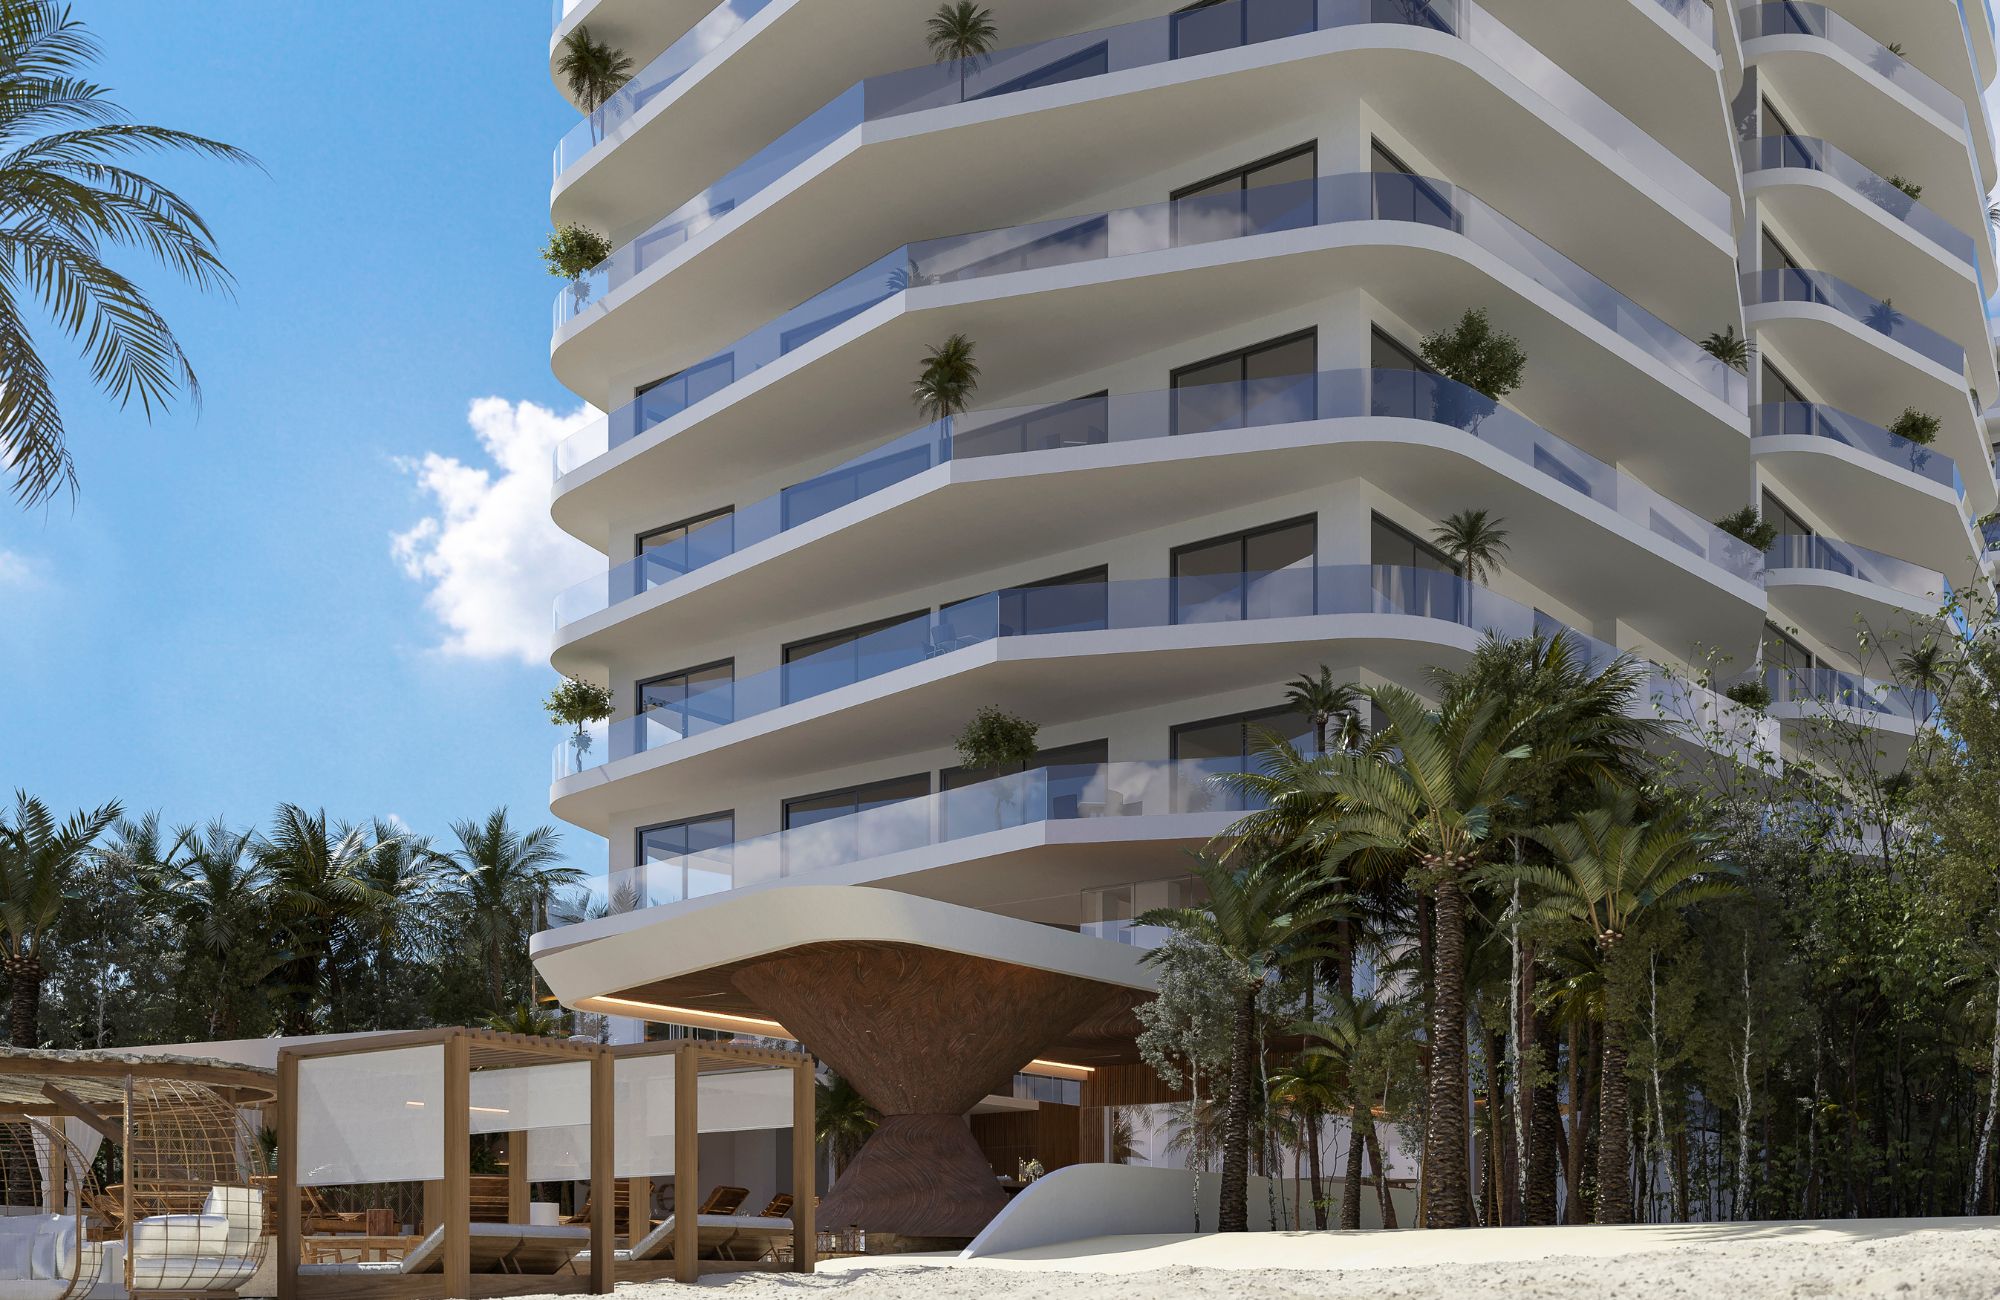 Panoramic green view condo, petfriendly, pre-construction, for sale Cancun.